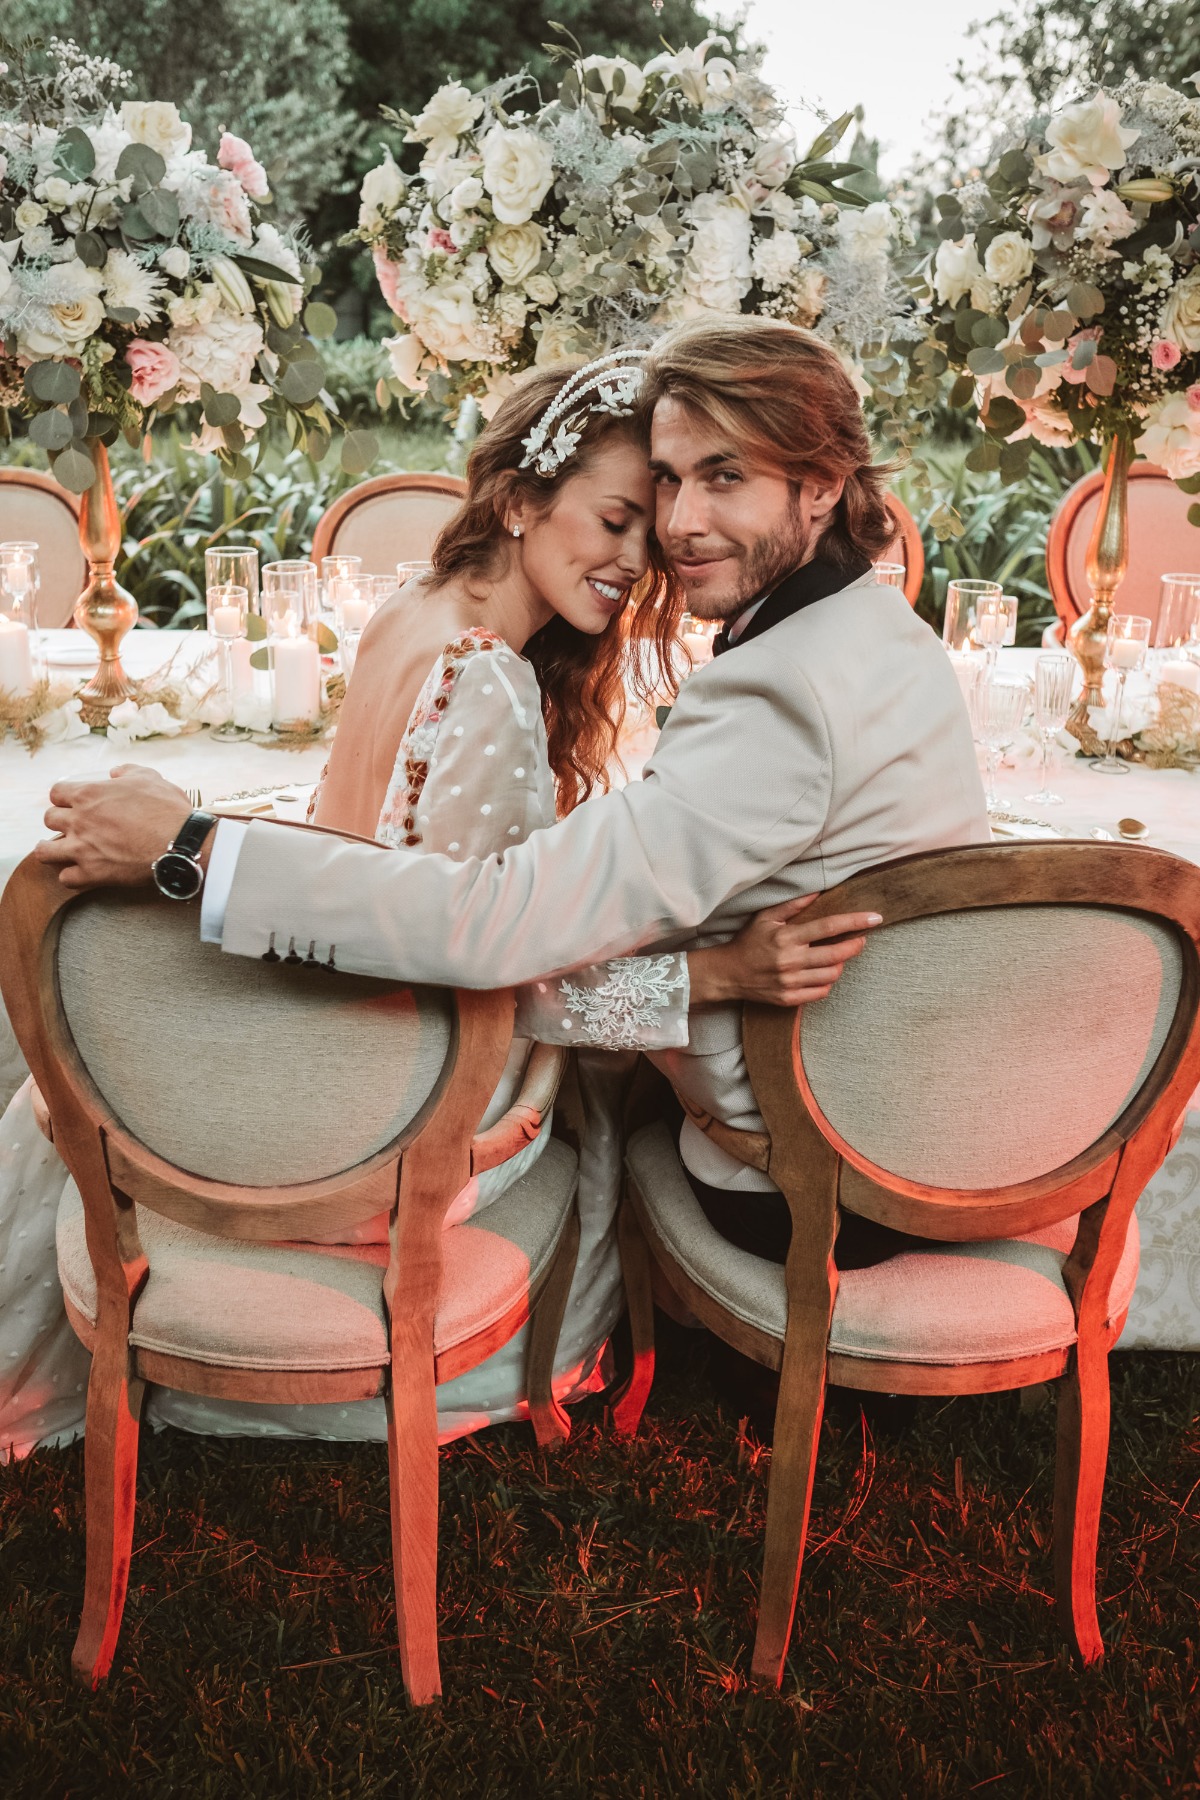 A Fairytale Styled Shoot In Spain With A Rosy Glow